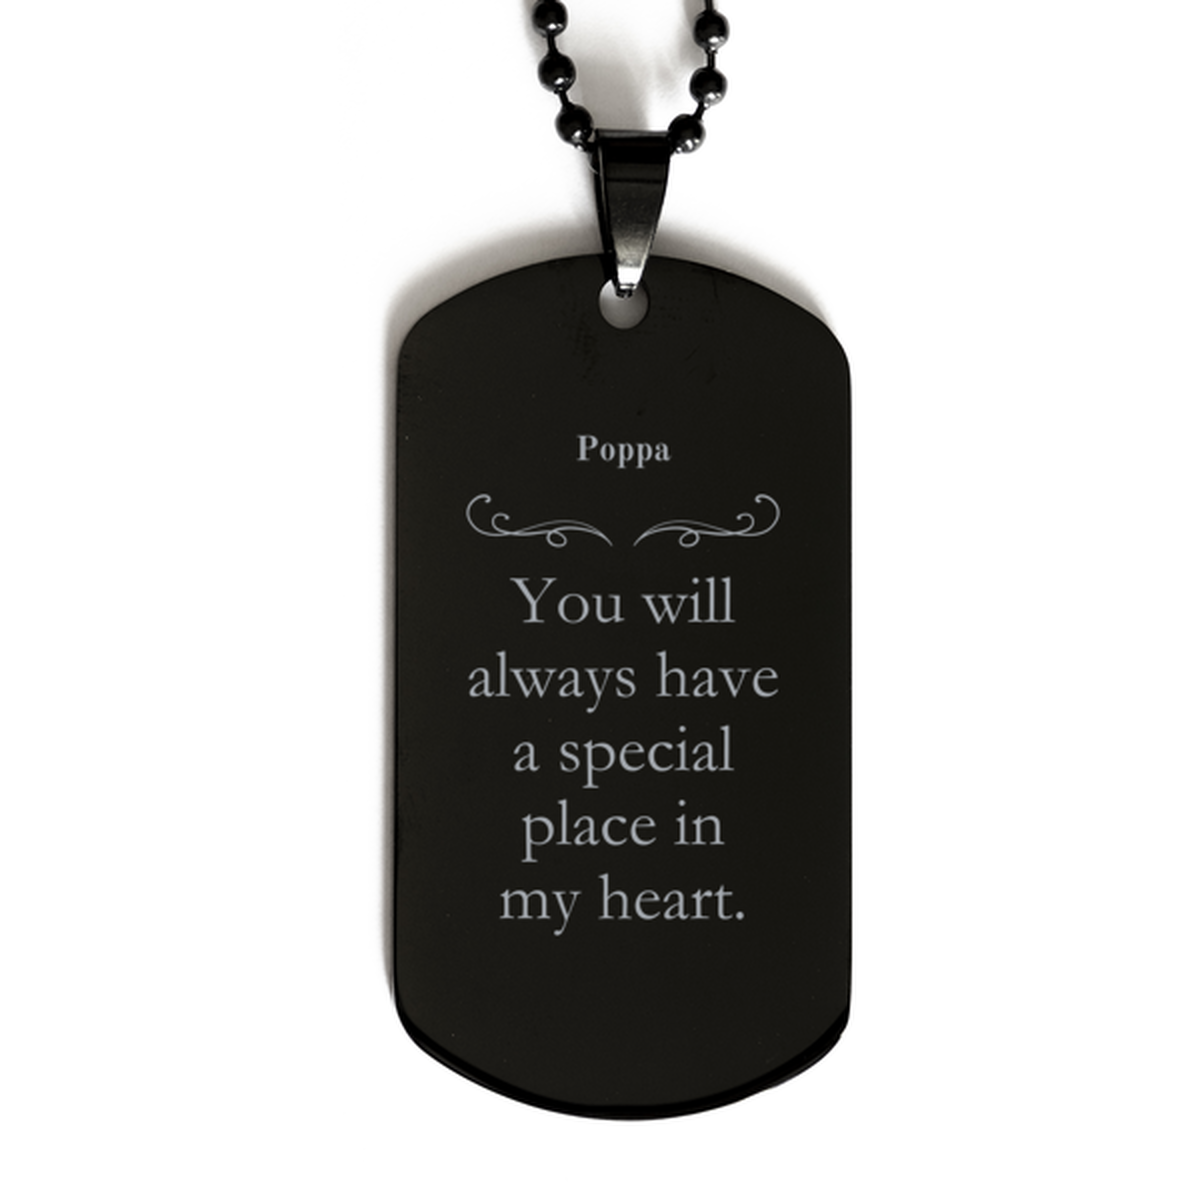 Black Dog Tag for Poppa - You will always have a special place in my heart - Engraved Gift for Veterans Day, Birthday, and Christmas - Unique Tag for Him